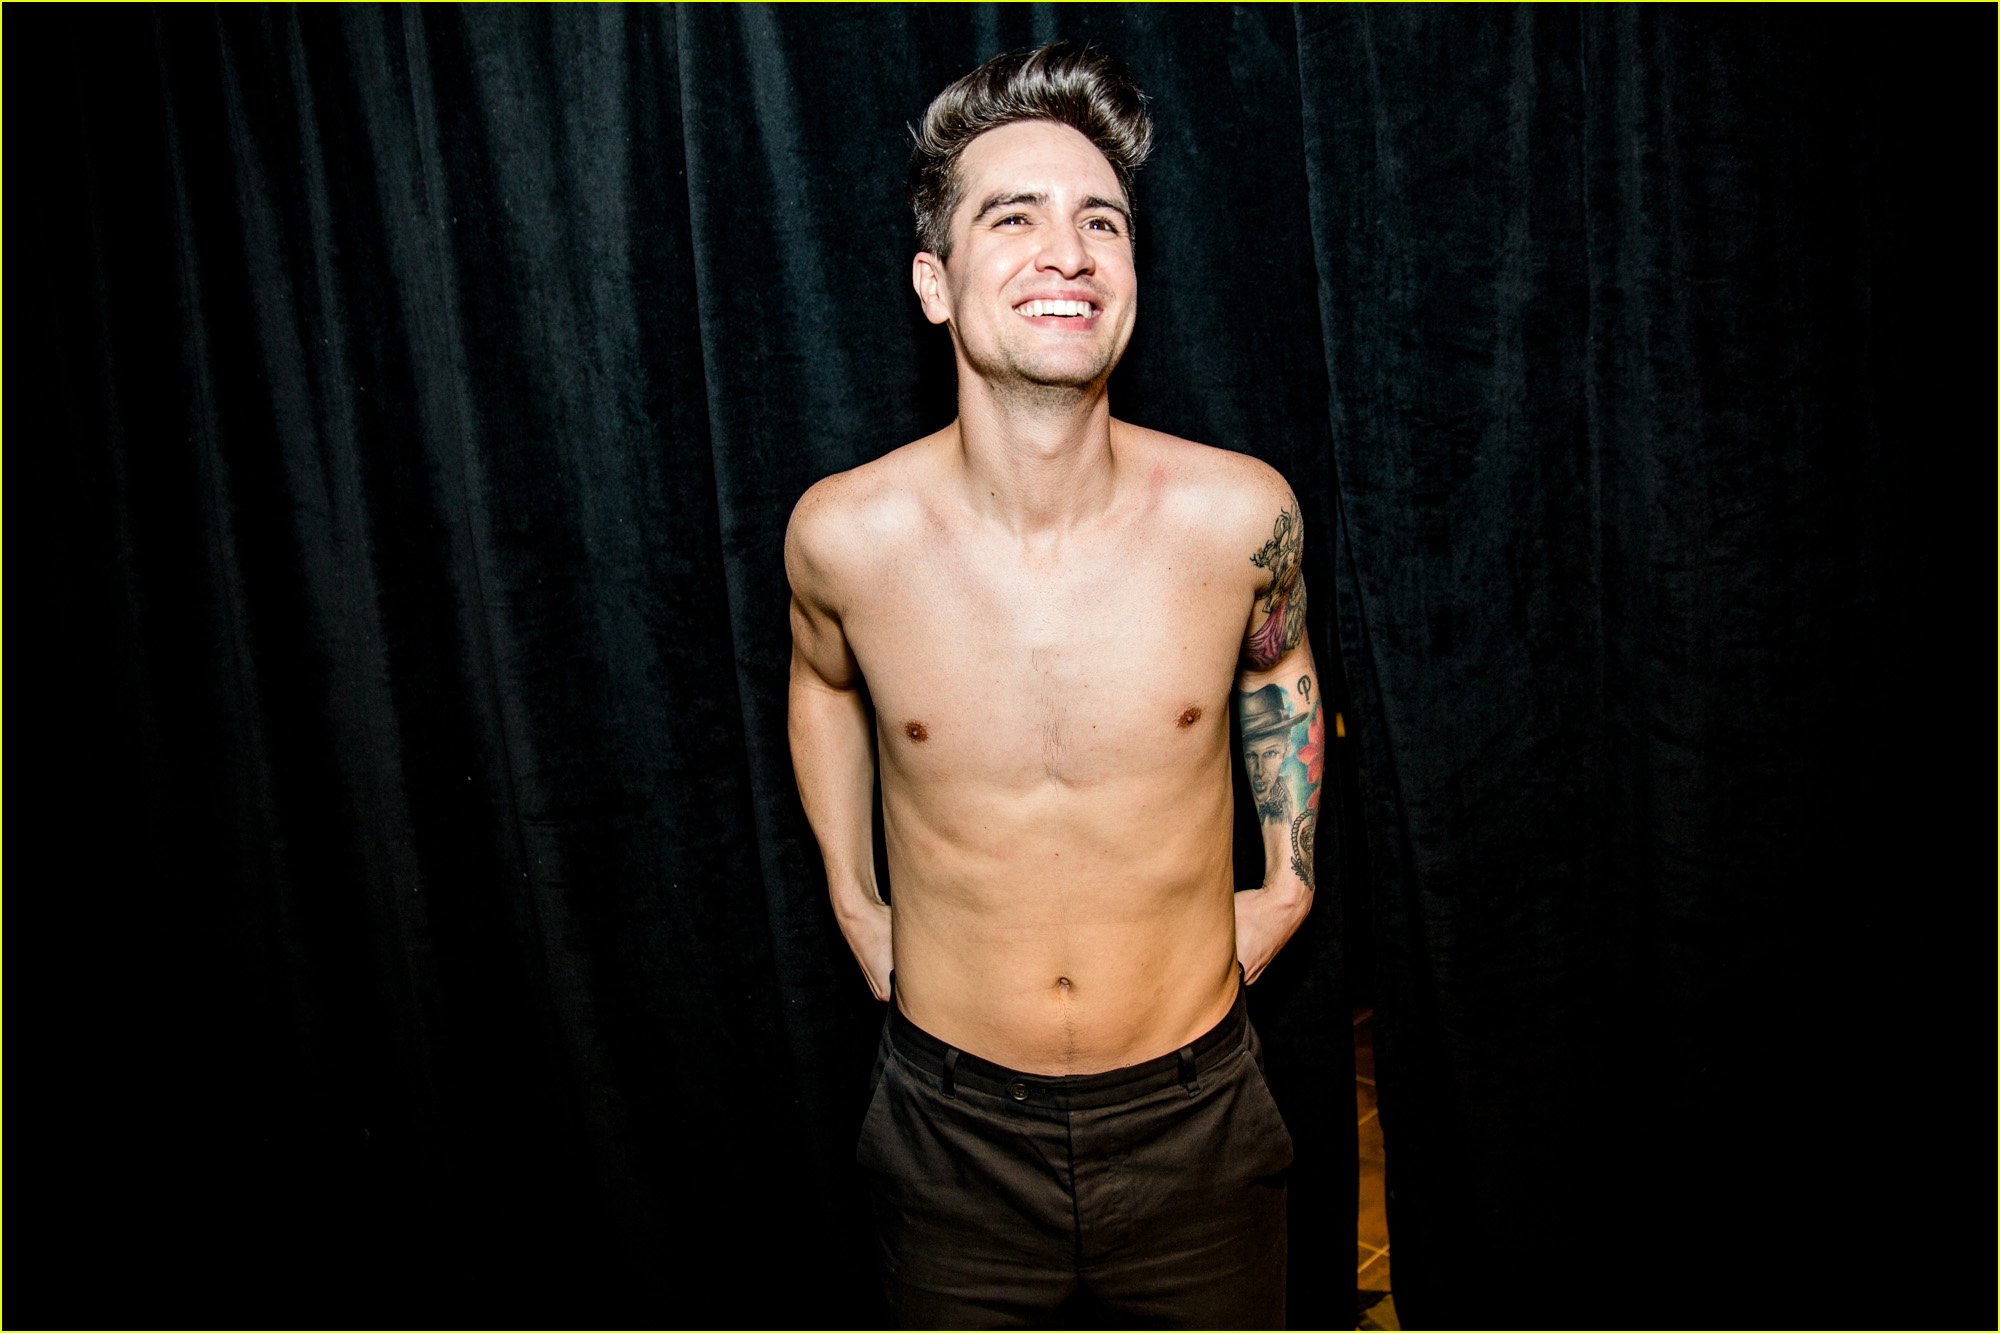 brendon urie looks so hot going shirtless backstage at iheartradio4151748. 